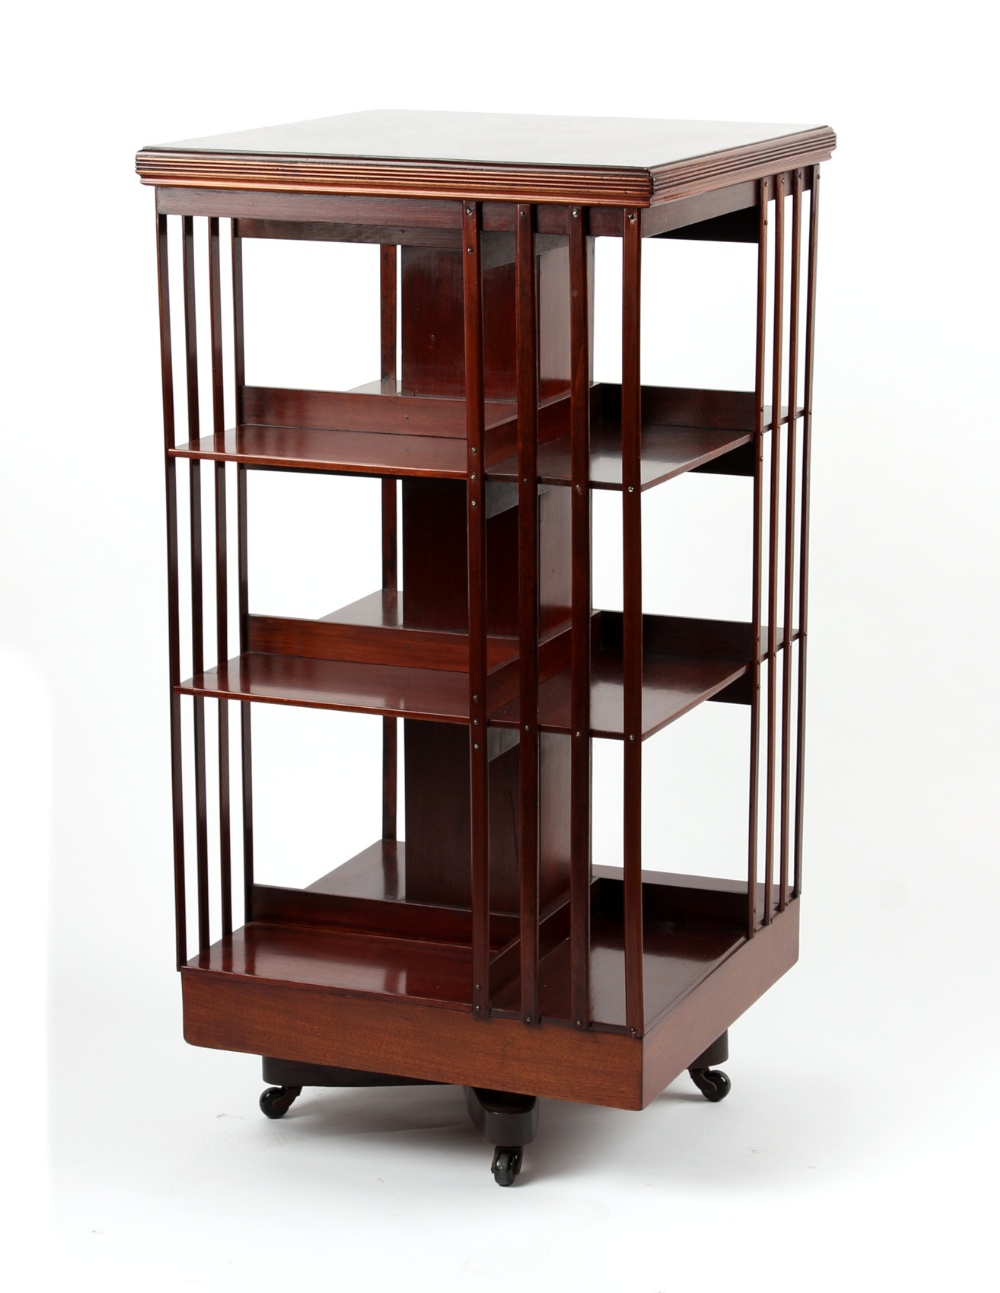 Property of a deceased estate - an Edwardian mahogany three-tier revolving bookcase (see